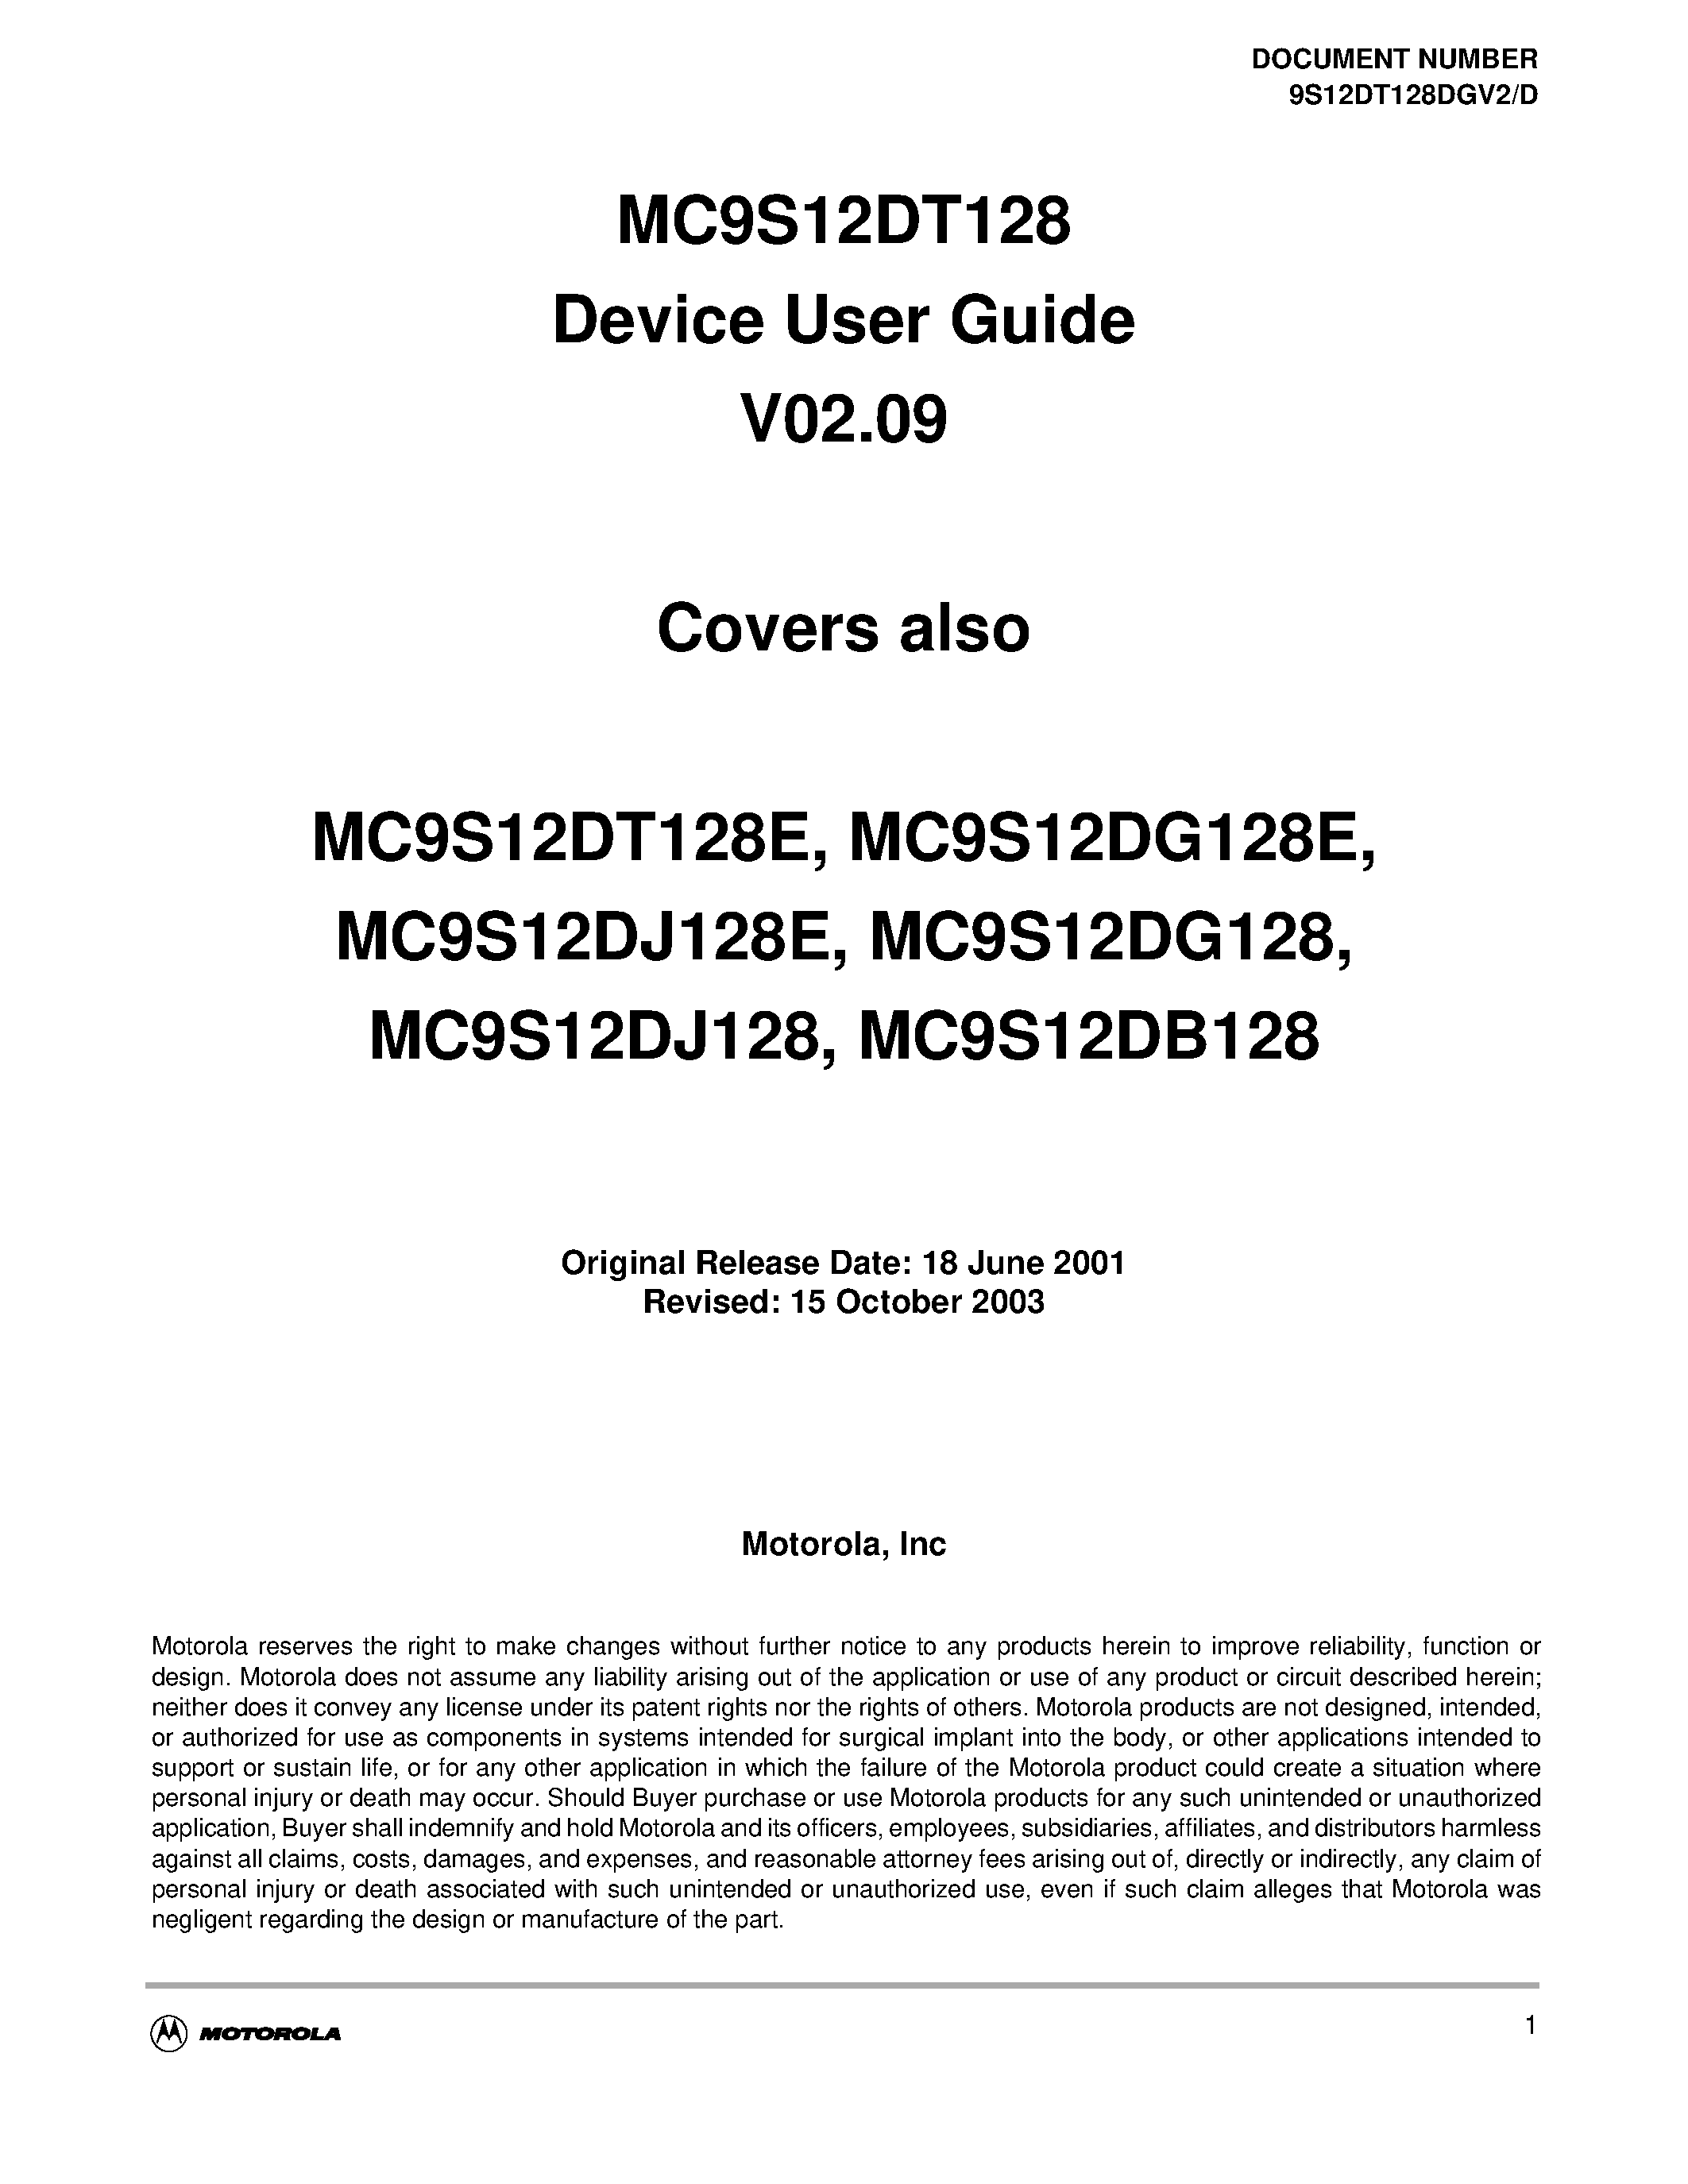 Datasheet SC515847 - MC9S12DT128 Device User Guide V02.09 page 1